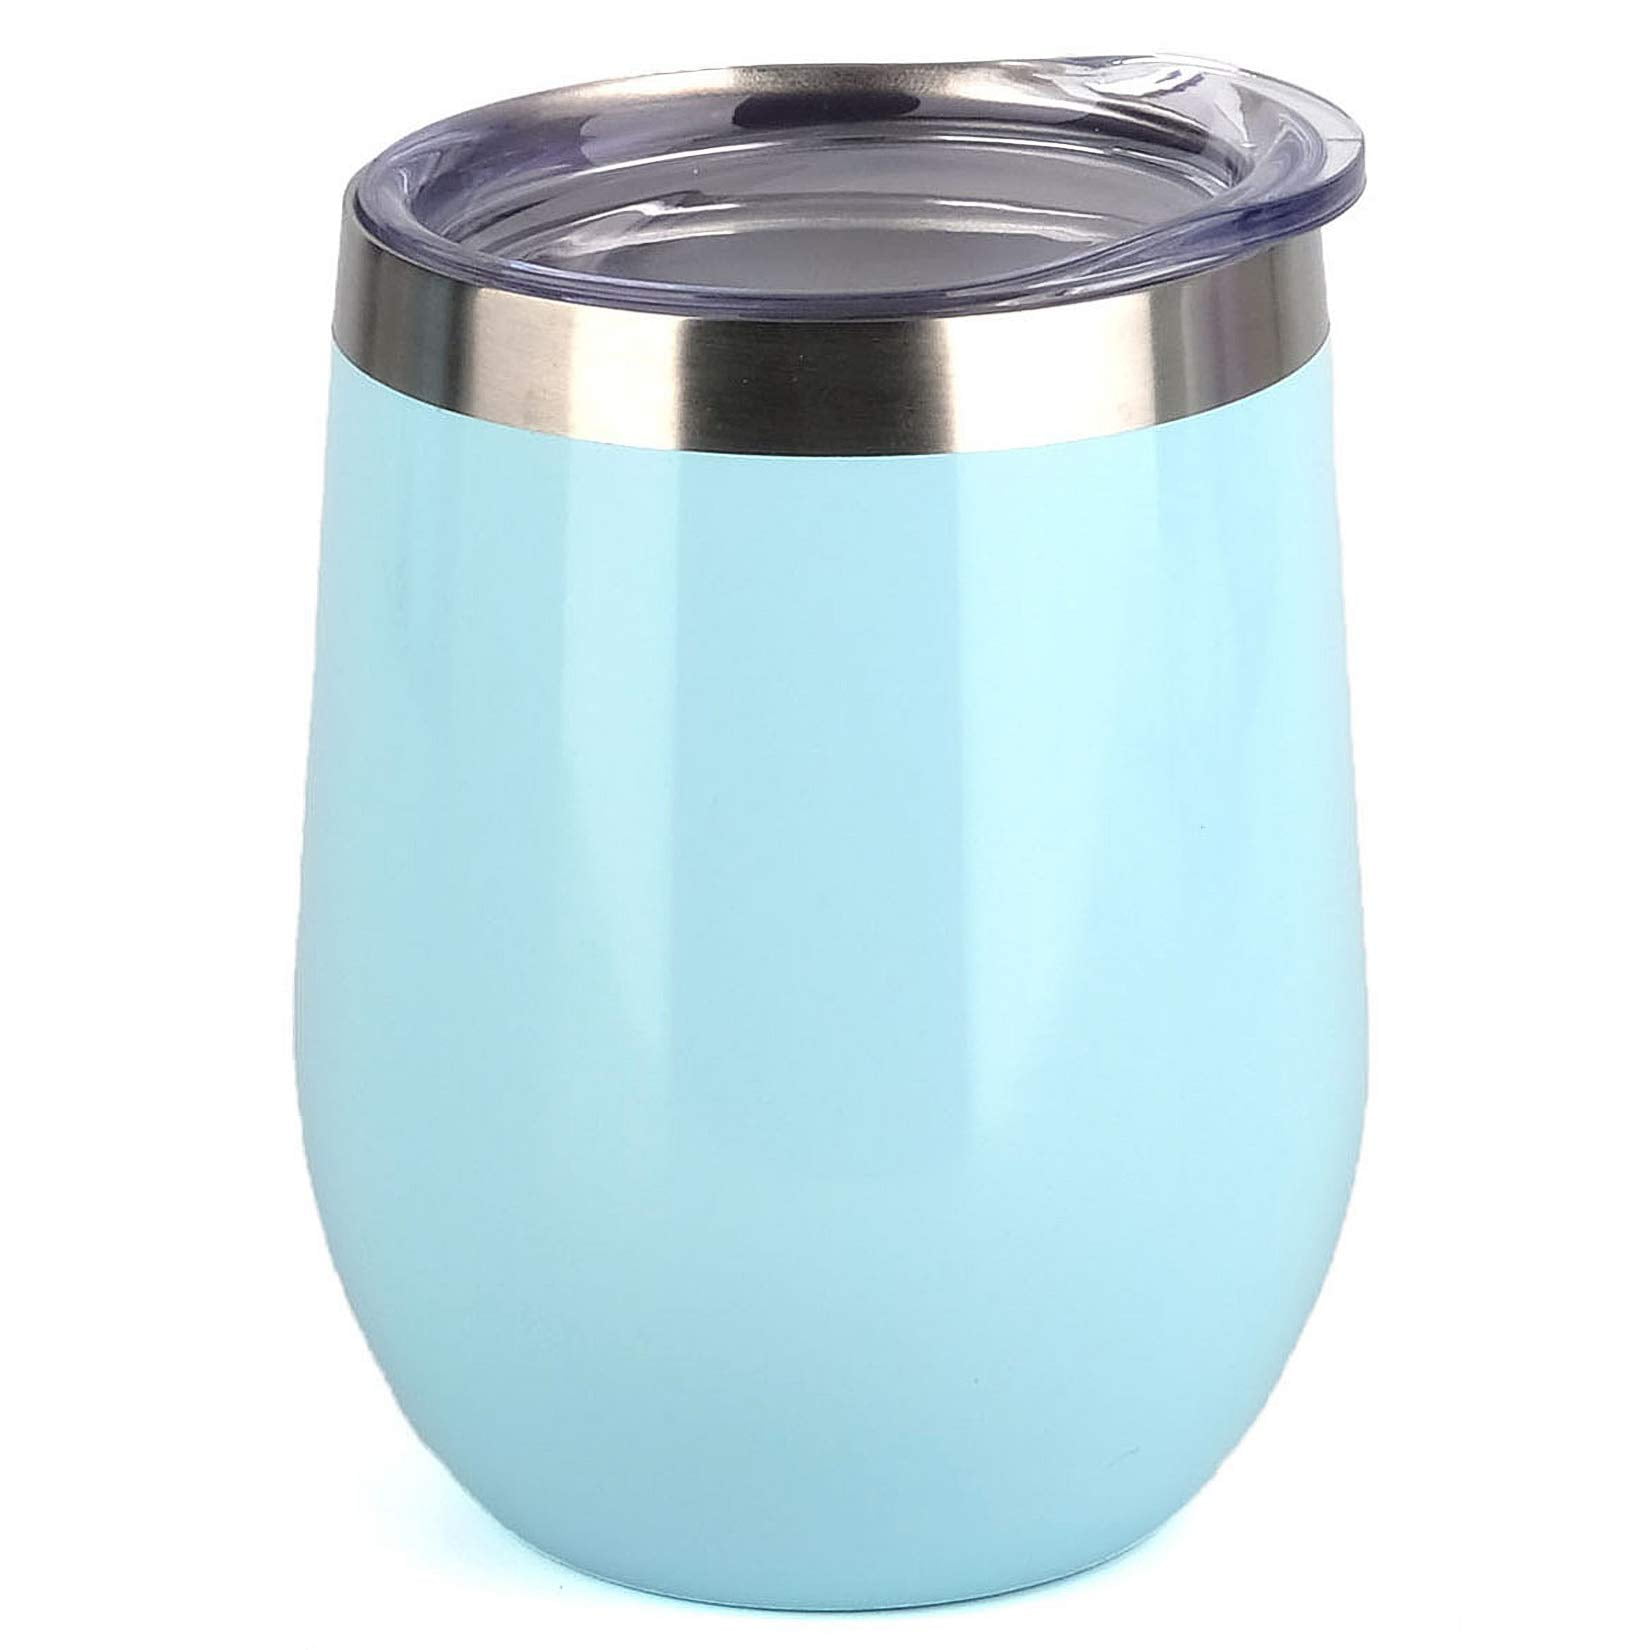 2 OLLI Blue Stainless Wine Tumblers, 12oz NEW Insulated Double